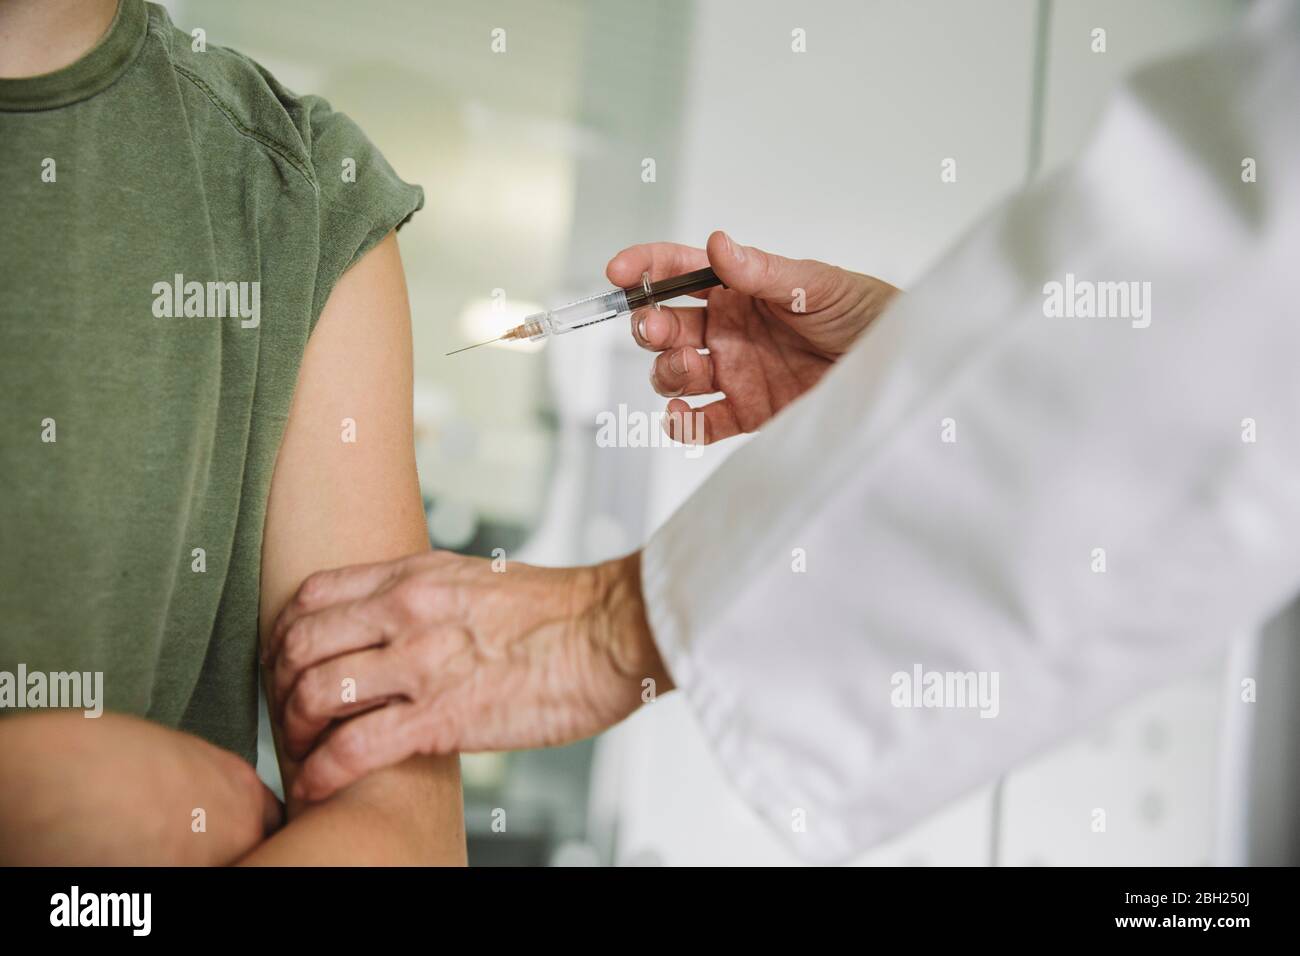 Doctor injecting vaccine into arm of teenager Stock Photo